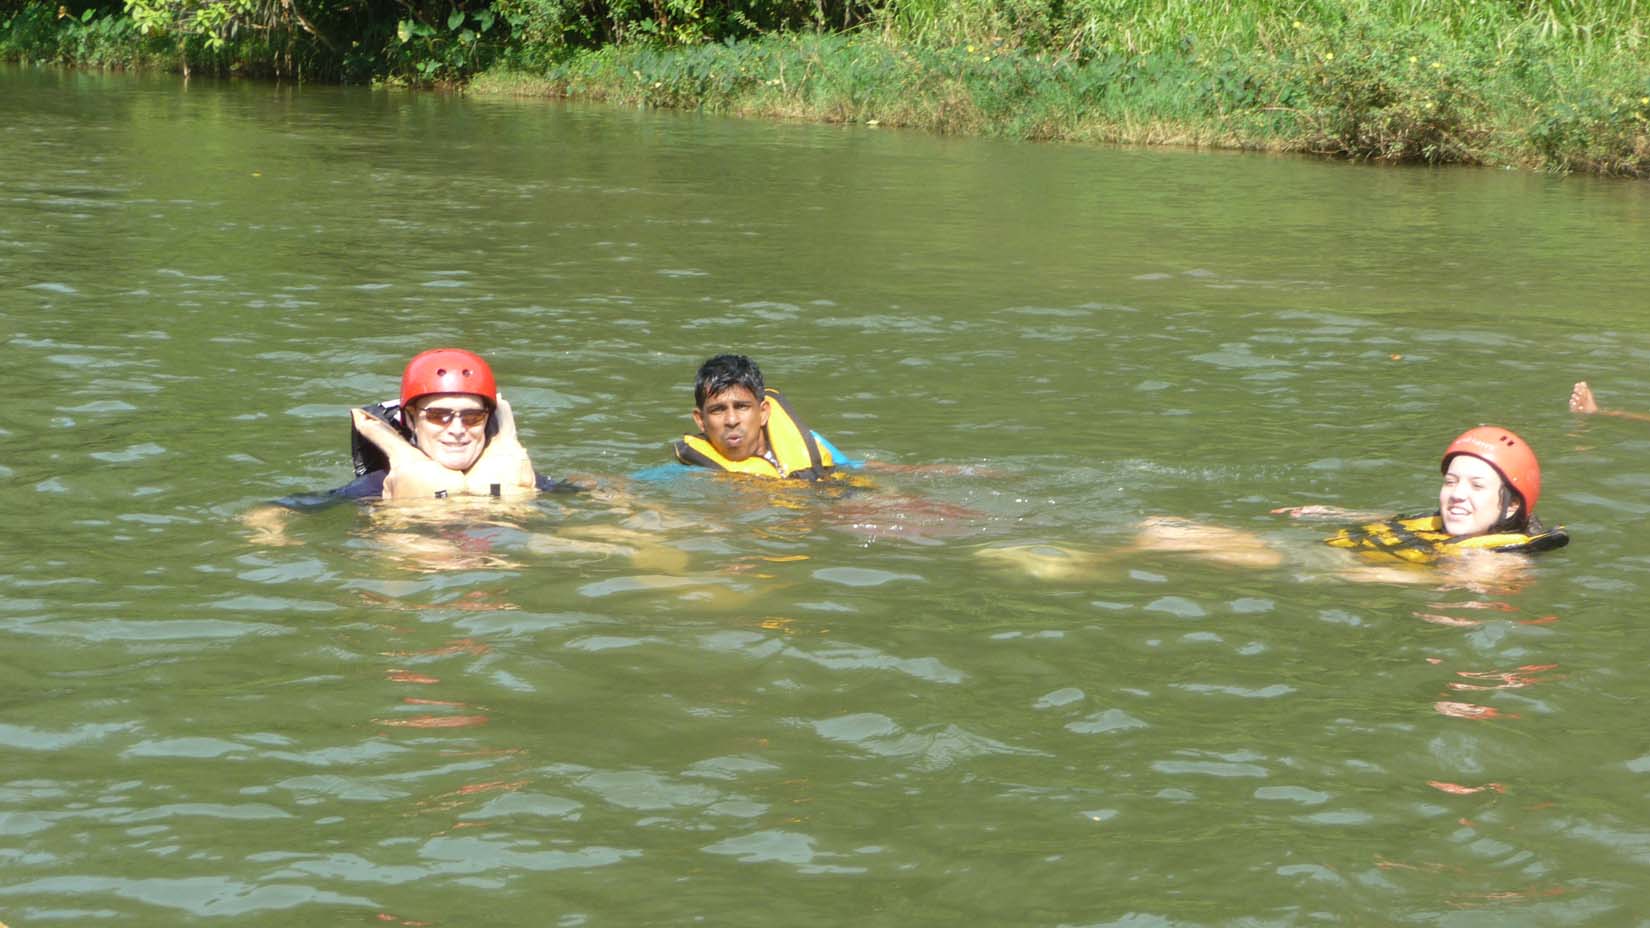 We wound up in the Kitulgala River after our raft tipped over.